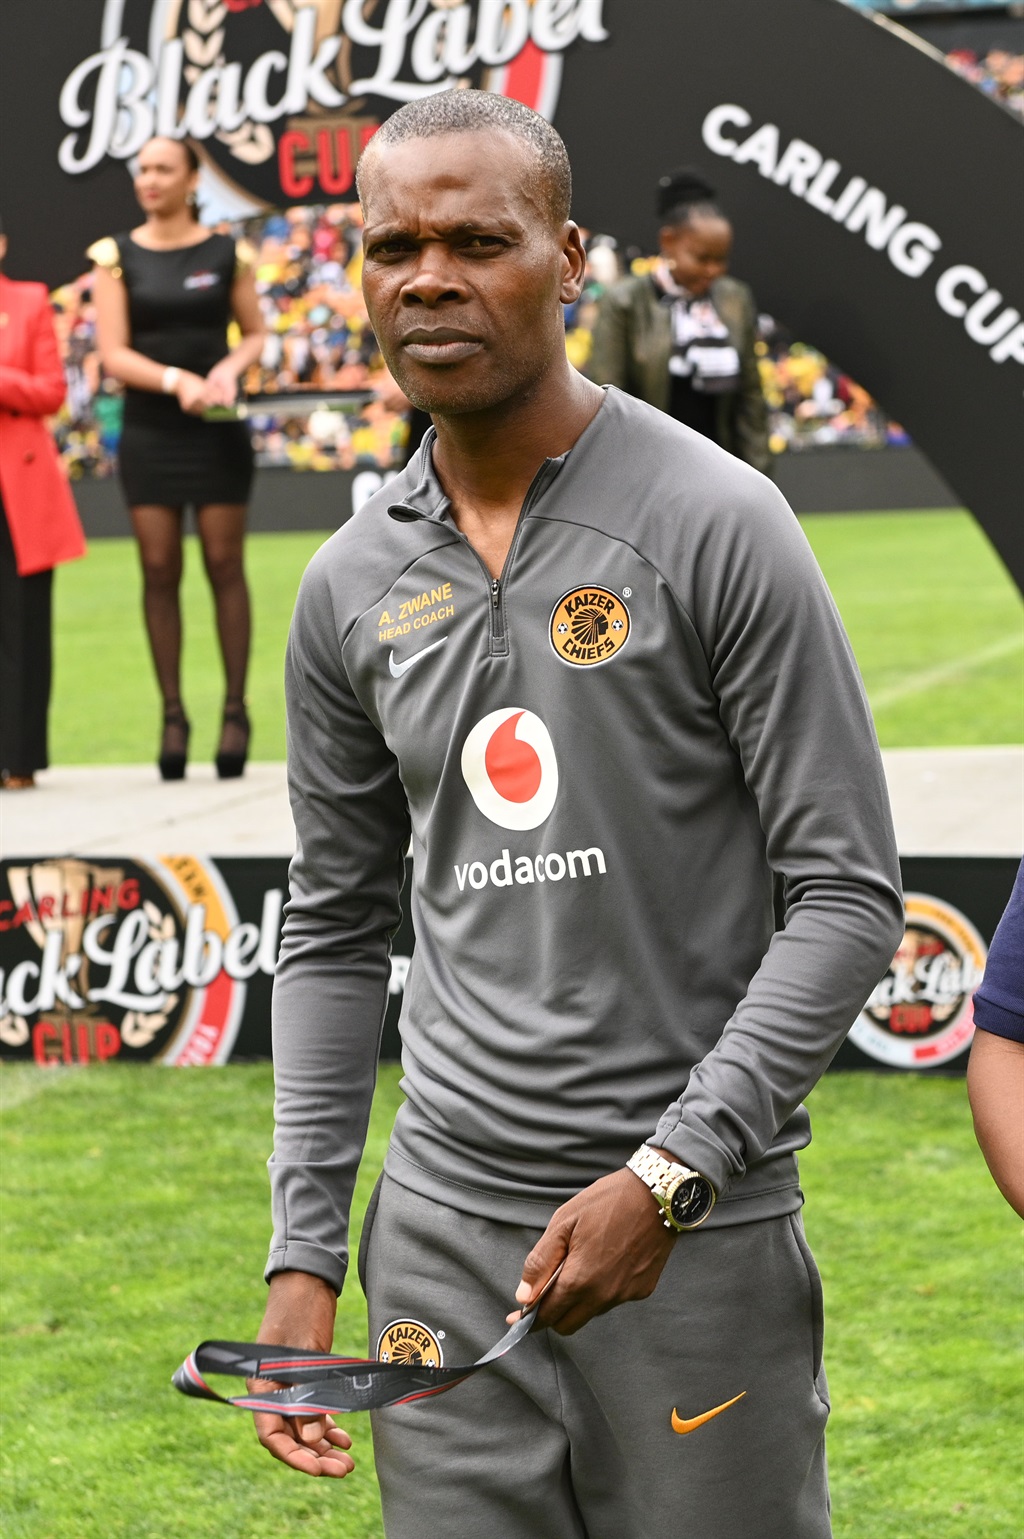 JOHANNESBURG, SOUTH AFRICA - NOVEMBER 12: Arthur Zwane during the Carling Black Label Cup, 3rd Place Penalty Shoot-Out between AmaZulu FC and Kaizer Chiefs at FNB Stadium on November 12, 2022 in Johannesburg, South Africa. (Photo by Lefty Shivambu/Gallo Images),óK}>^